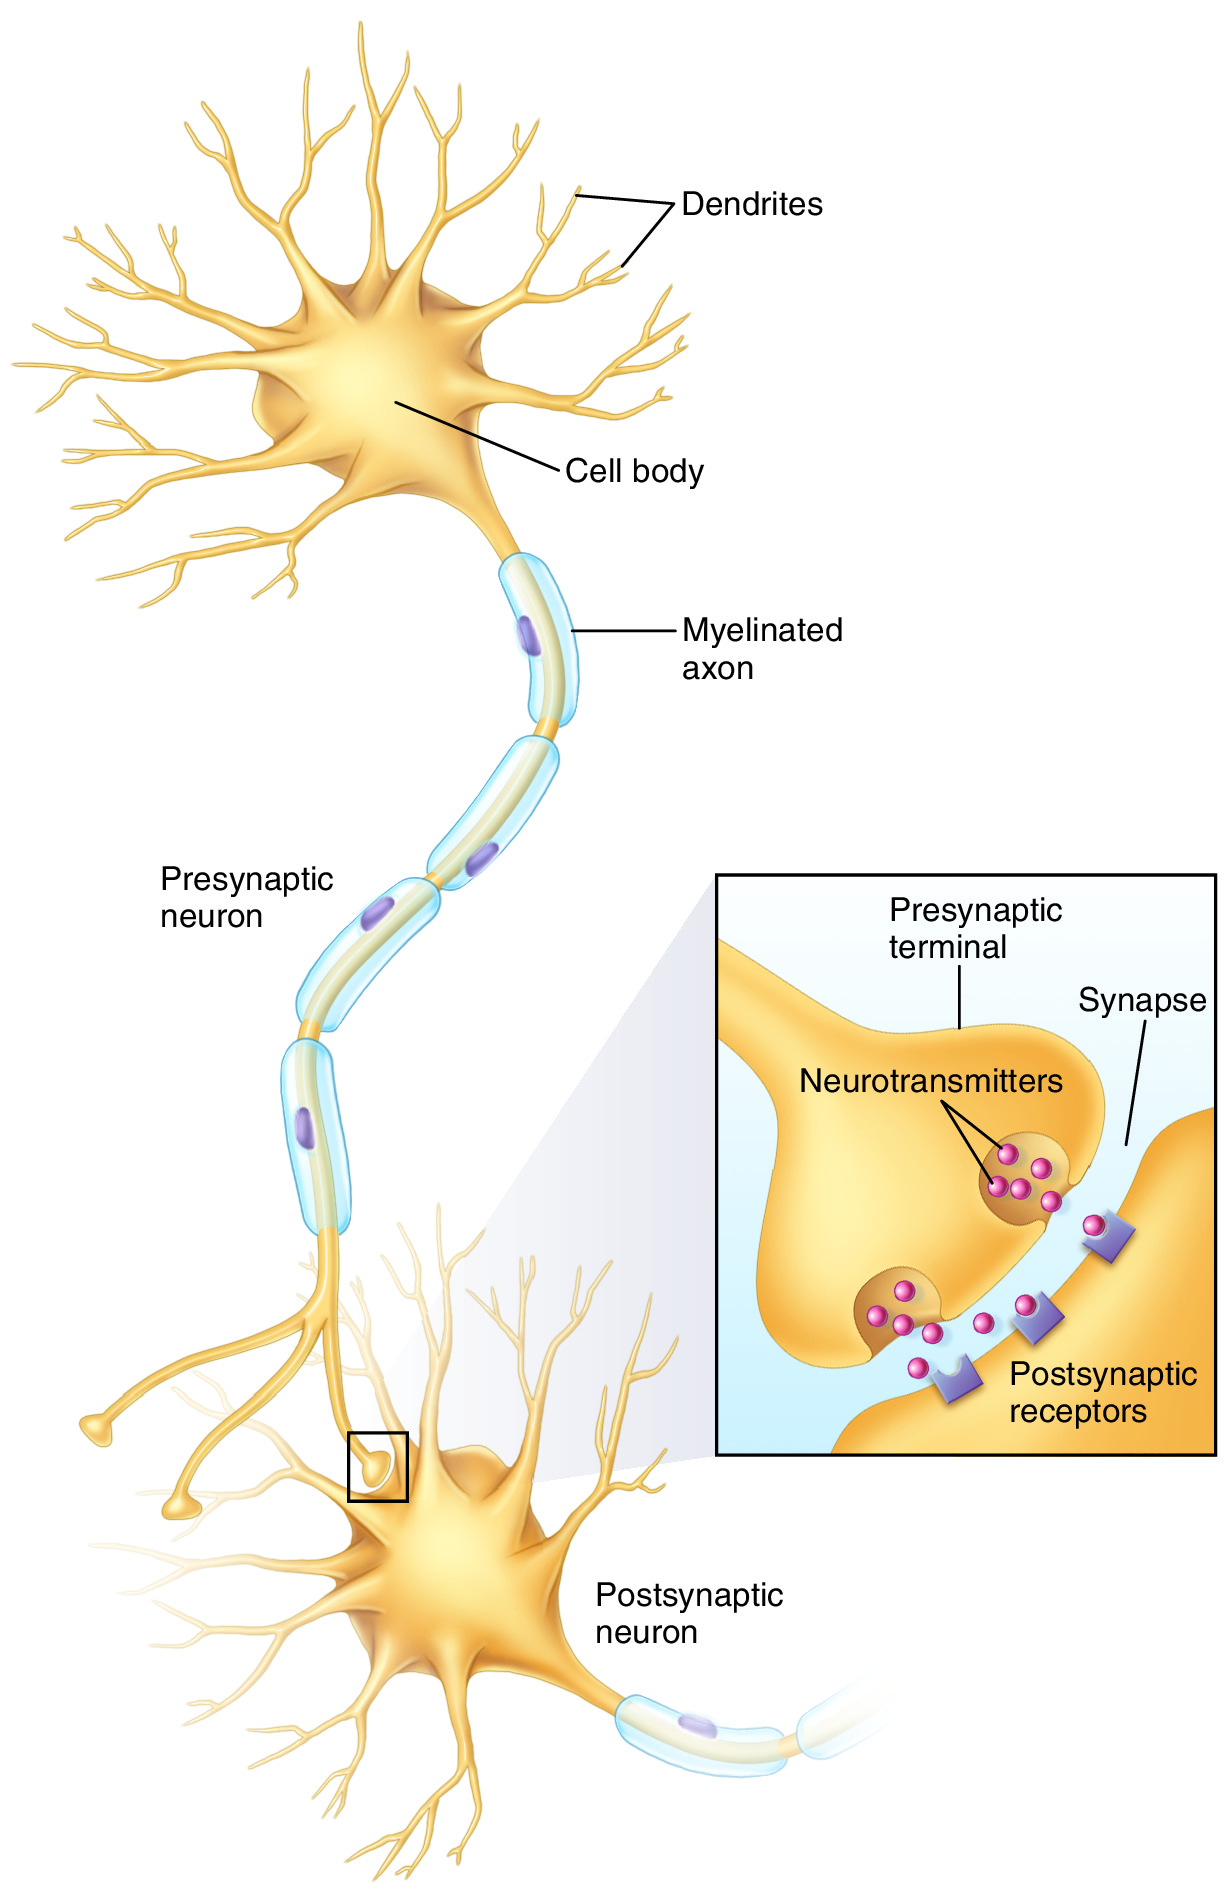 neural plasticity works via firing patterns of presynaptic and postsynaptic neurons